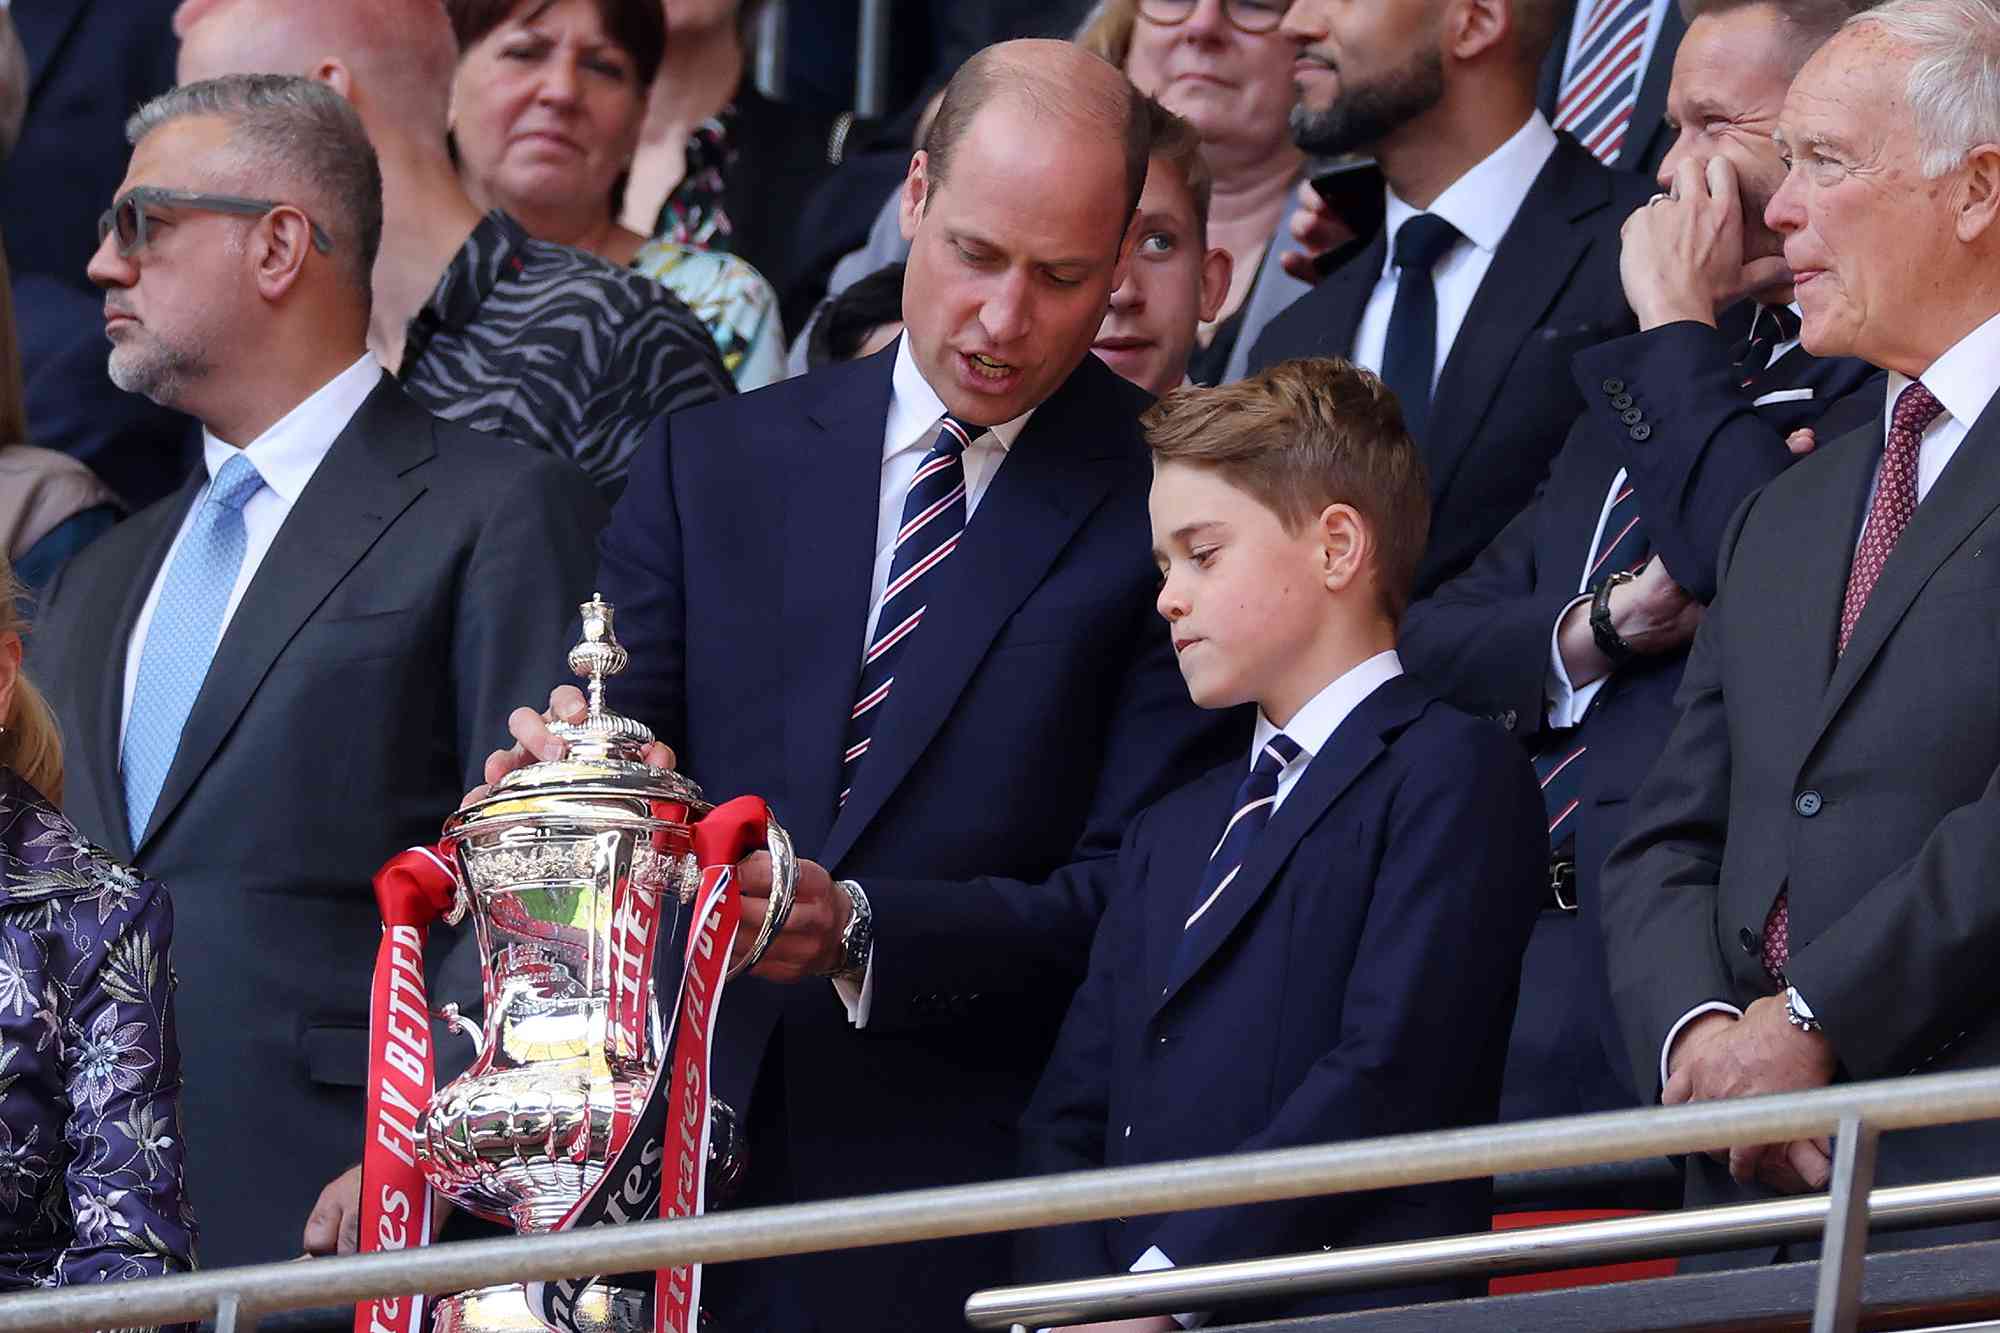 The Prince of Wales, who is president of the Football Association, and his son Prince George saw Manchester City and Manchester United at Wembley Stadium face-off in the FA Cup final After Canceling Royal Duties